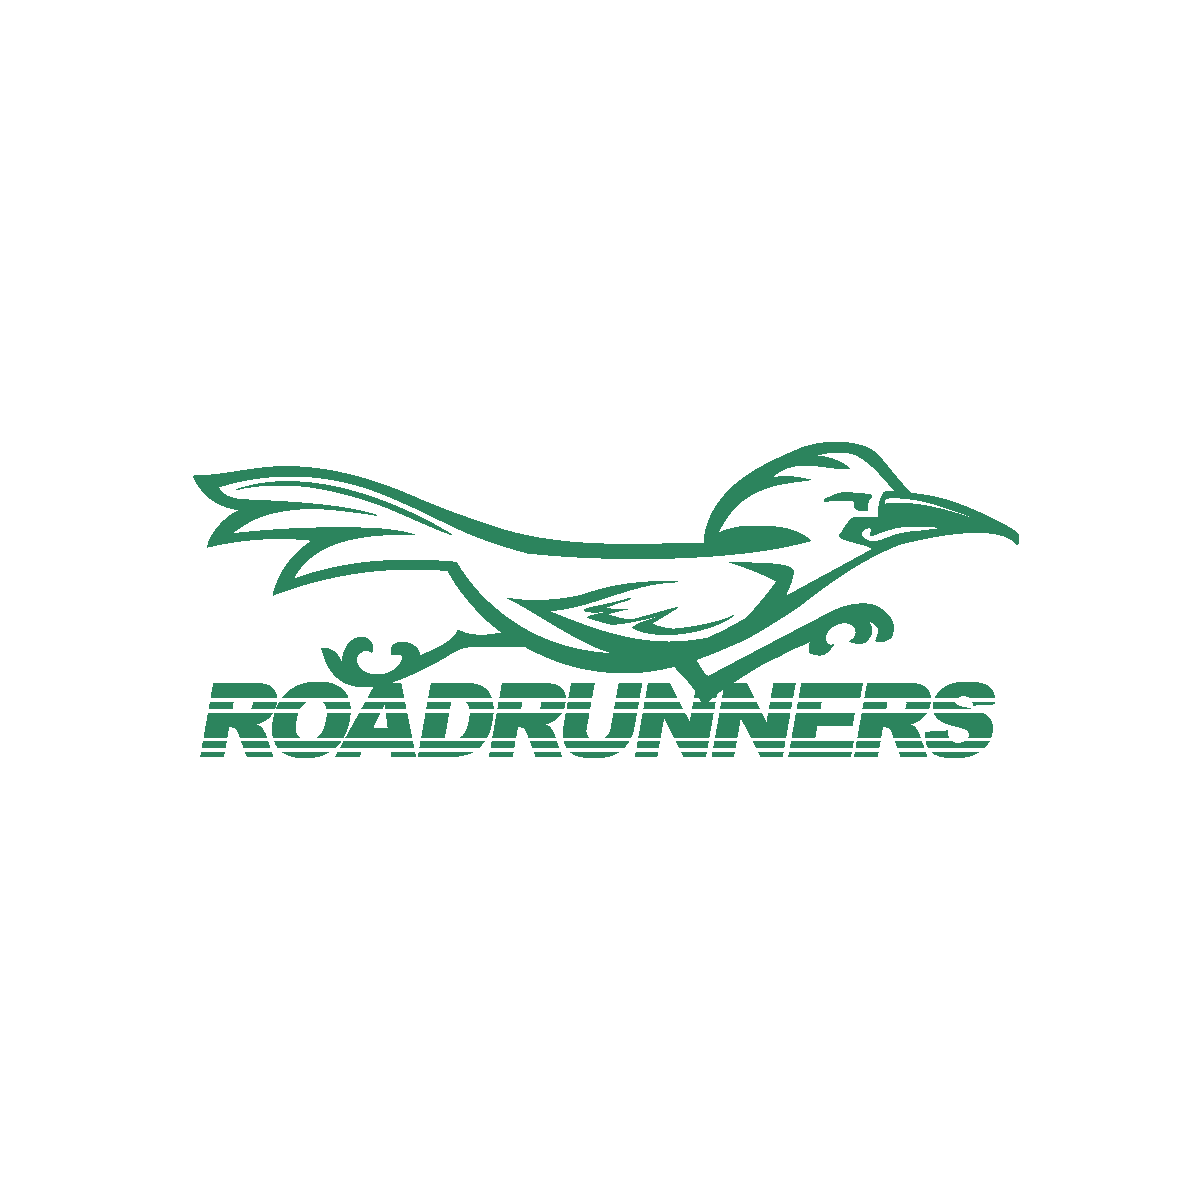 Athletics mascot with the word "Roadrunners" - green